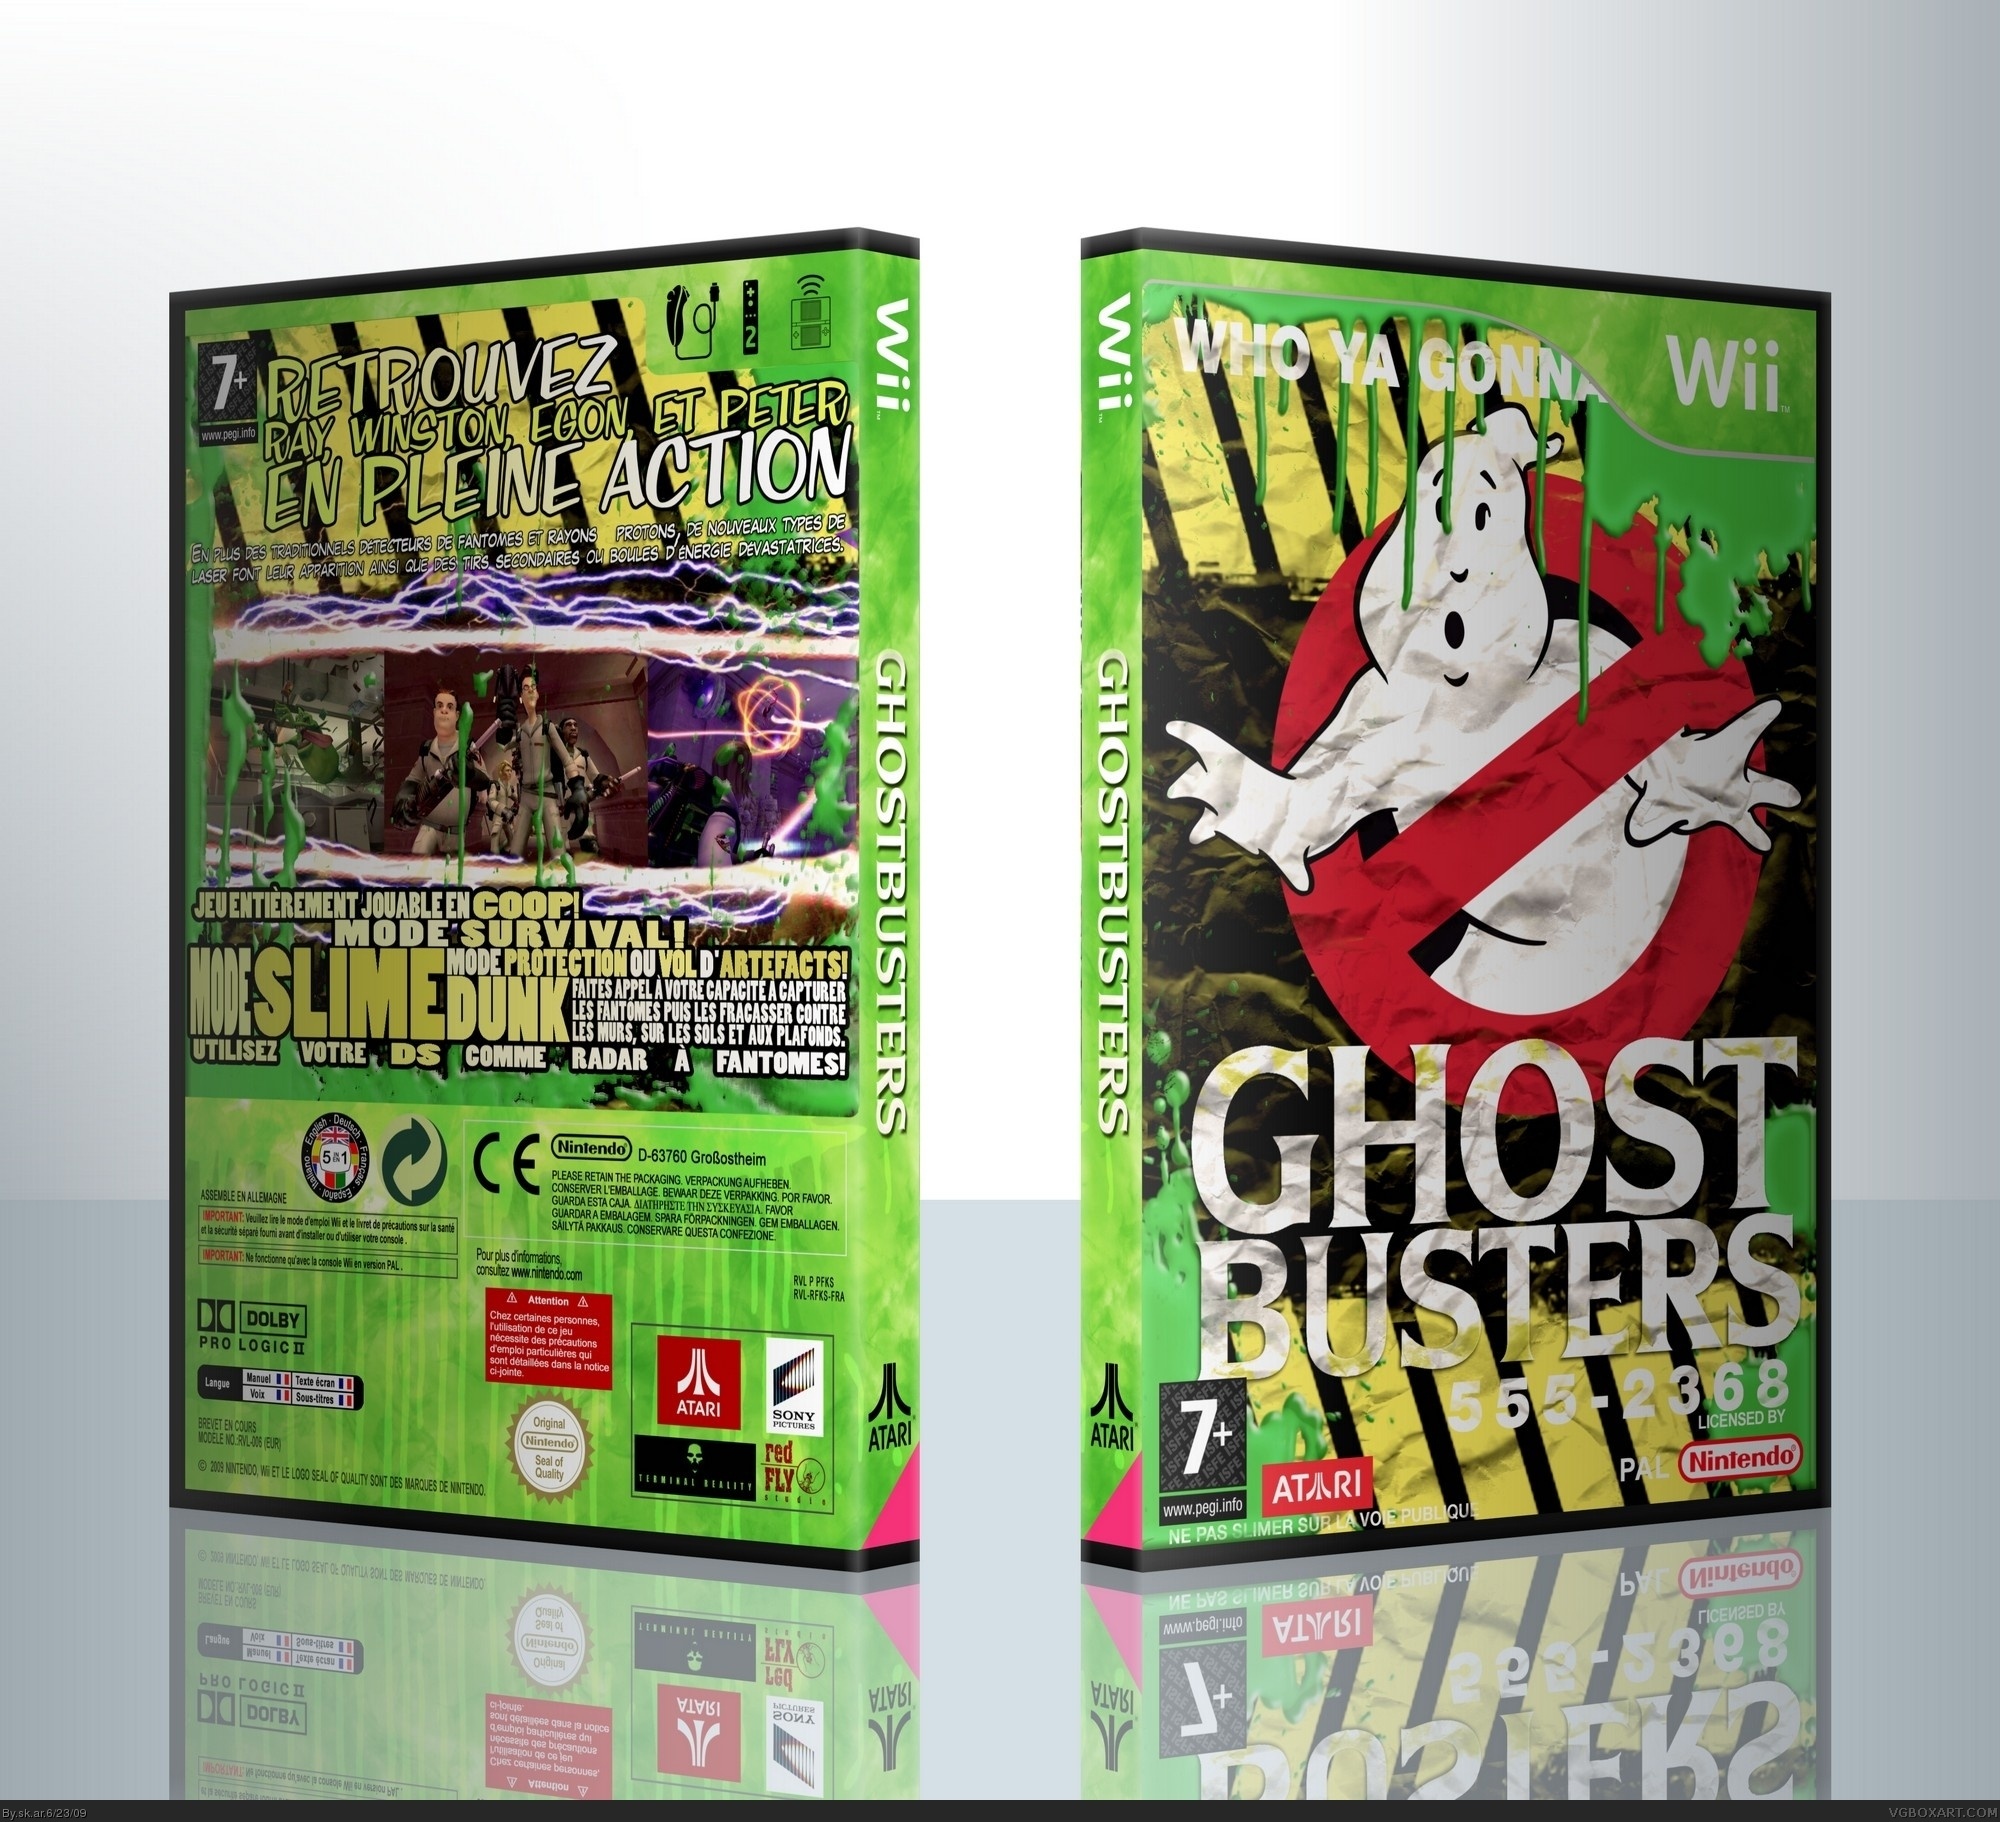 GHOSTBUSTER box cover